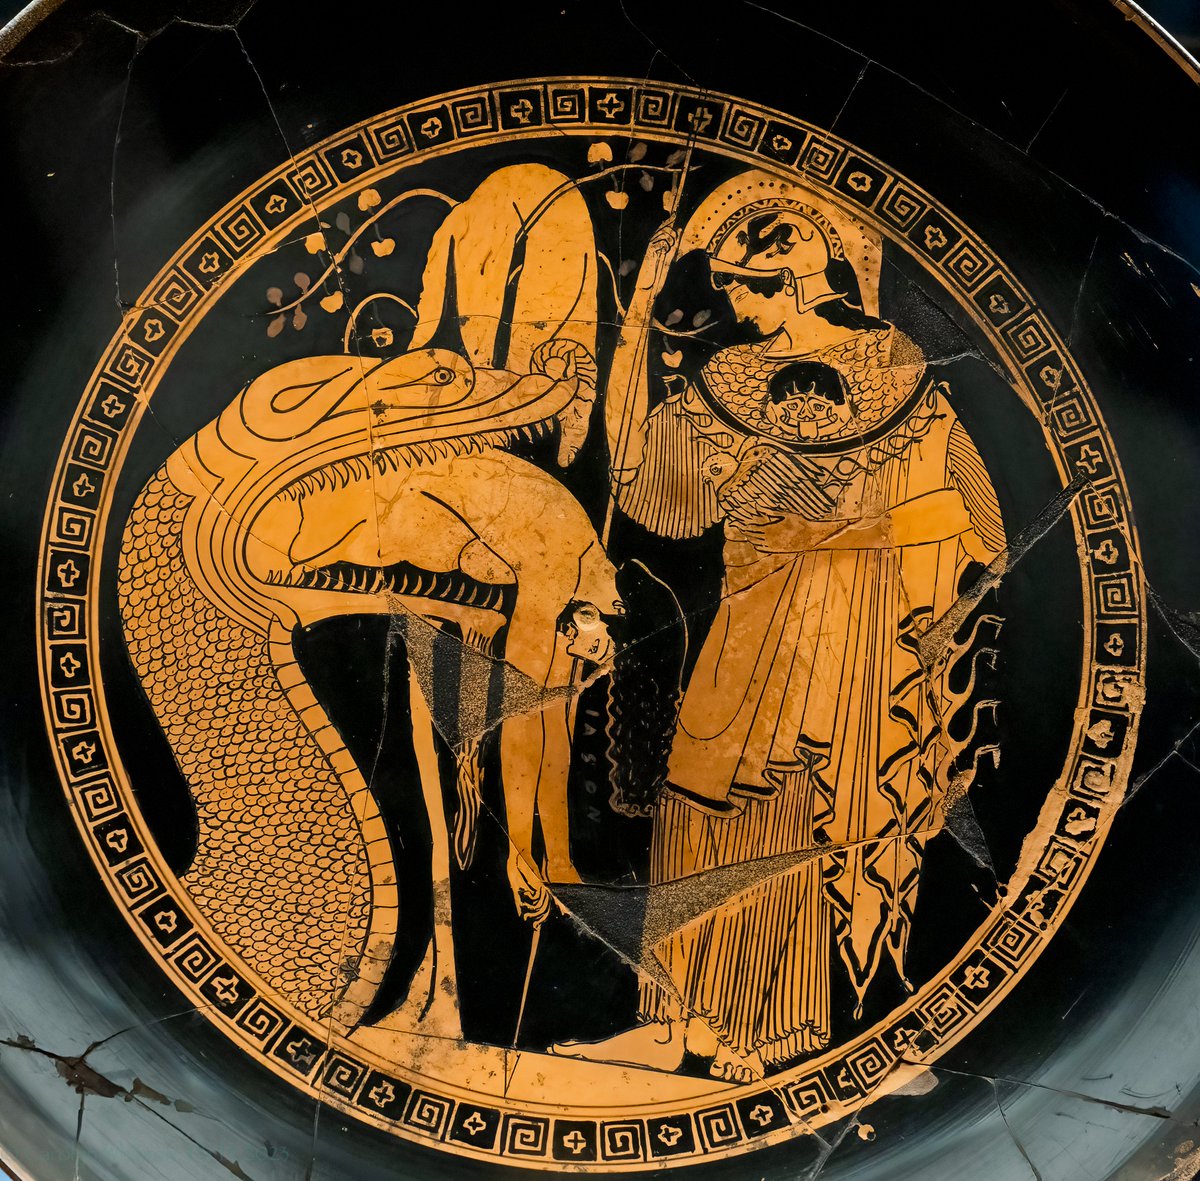 This felt like a celebrity sighting for me at #vaticanmuseums: 5th c. bce kylix with Jason having difficulties with a dragon while trying for the golden fleece (pictured). Love Athena's rescue of him, with owl in hand, & special sphynx helmet.  Her aegis is looking extra snakey.